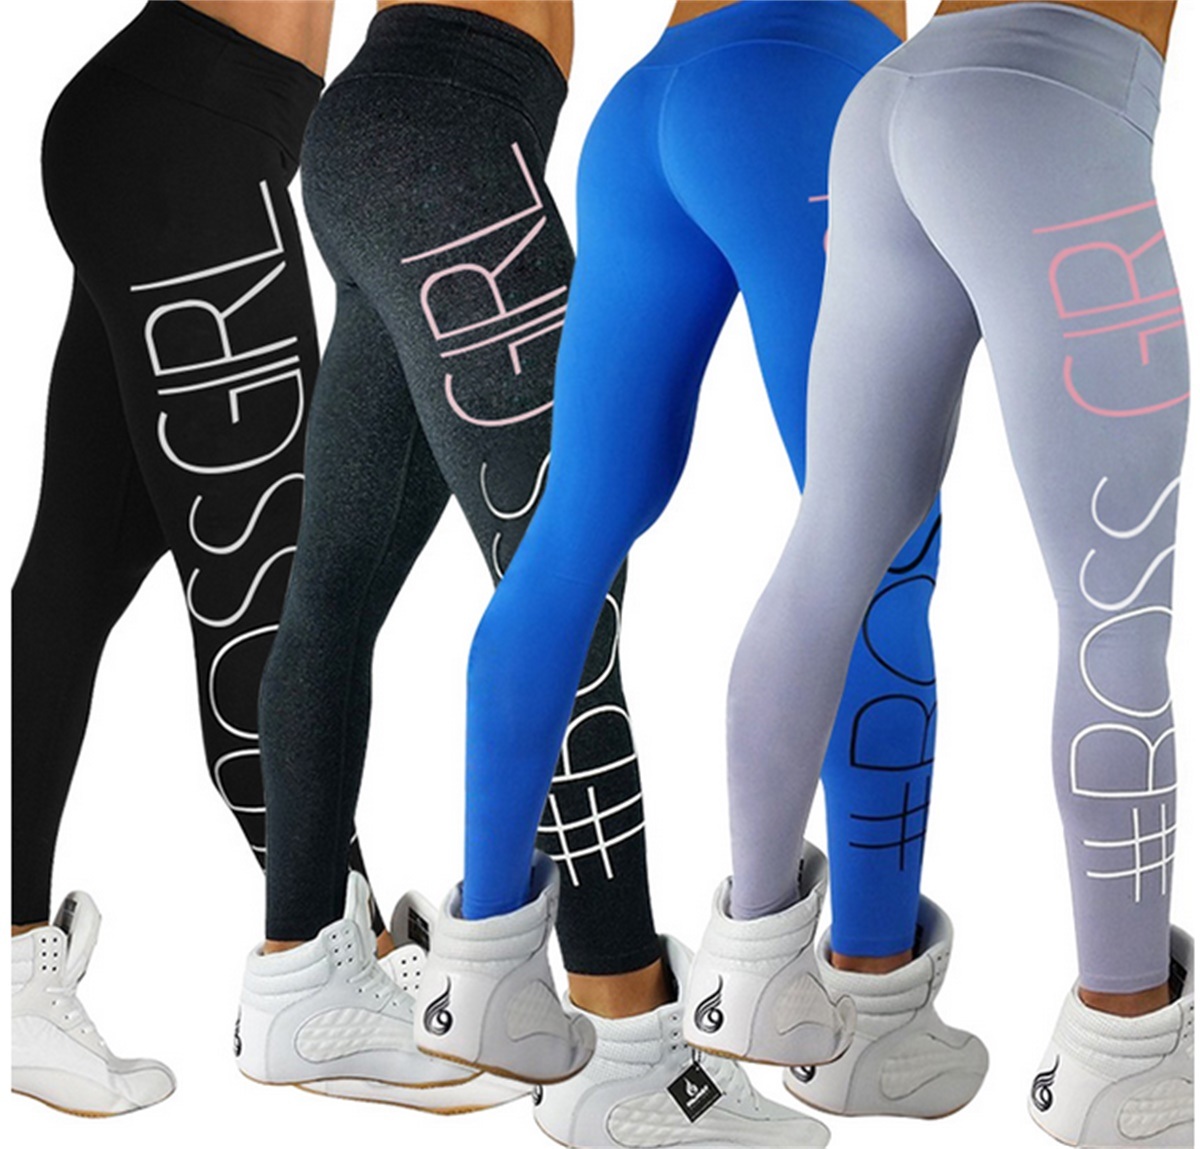 2017 Hot Trend Yoga Sports Leggings with Printing